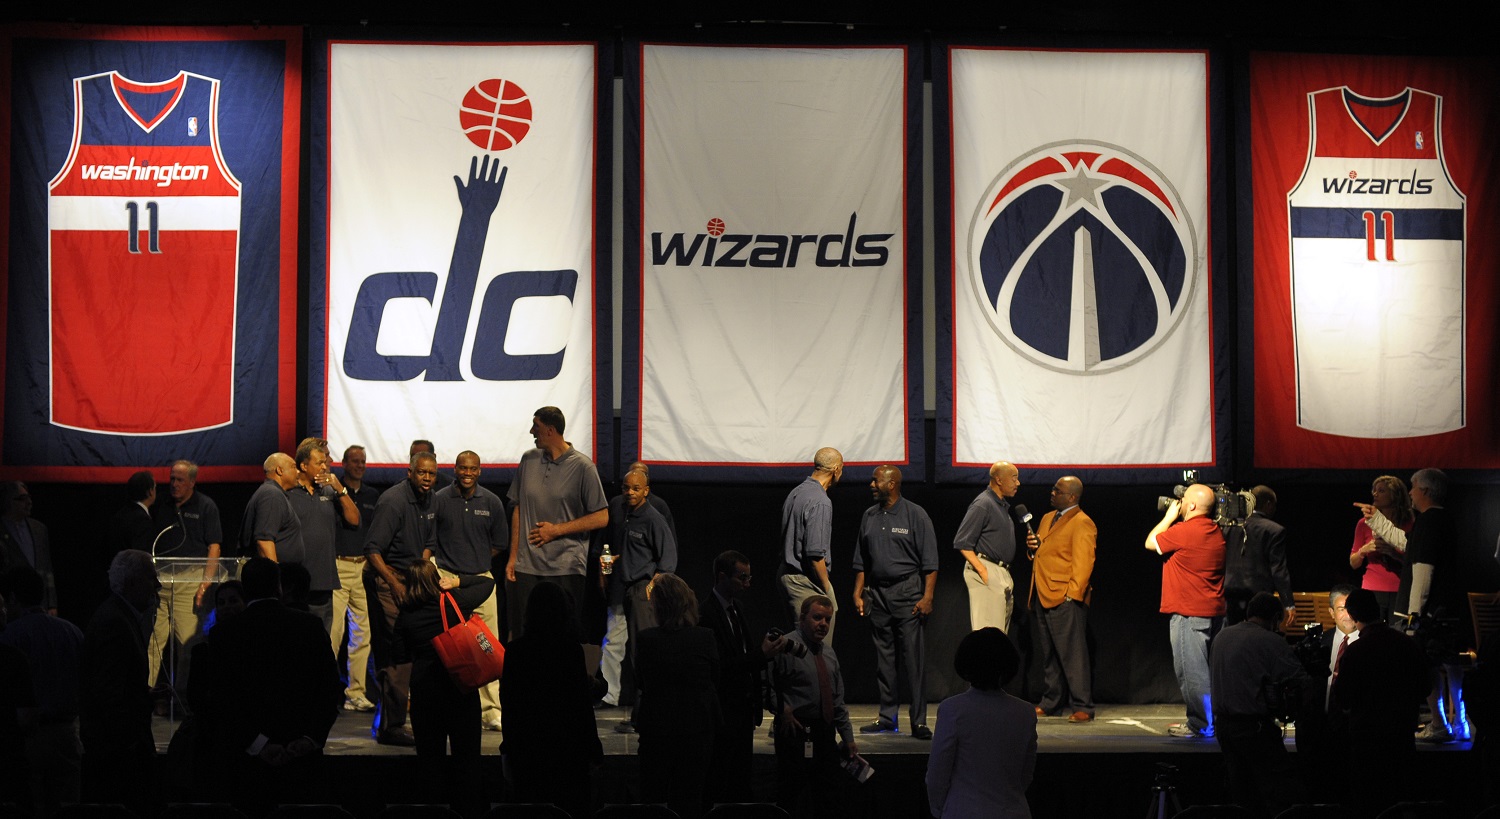 The Washington Wizards trace their history back to the Chicago Packers of the early 1960s. |  John McDonnell/The Washington Post via Getty Images